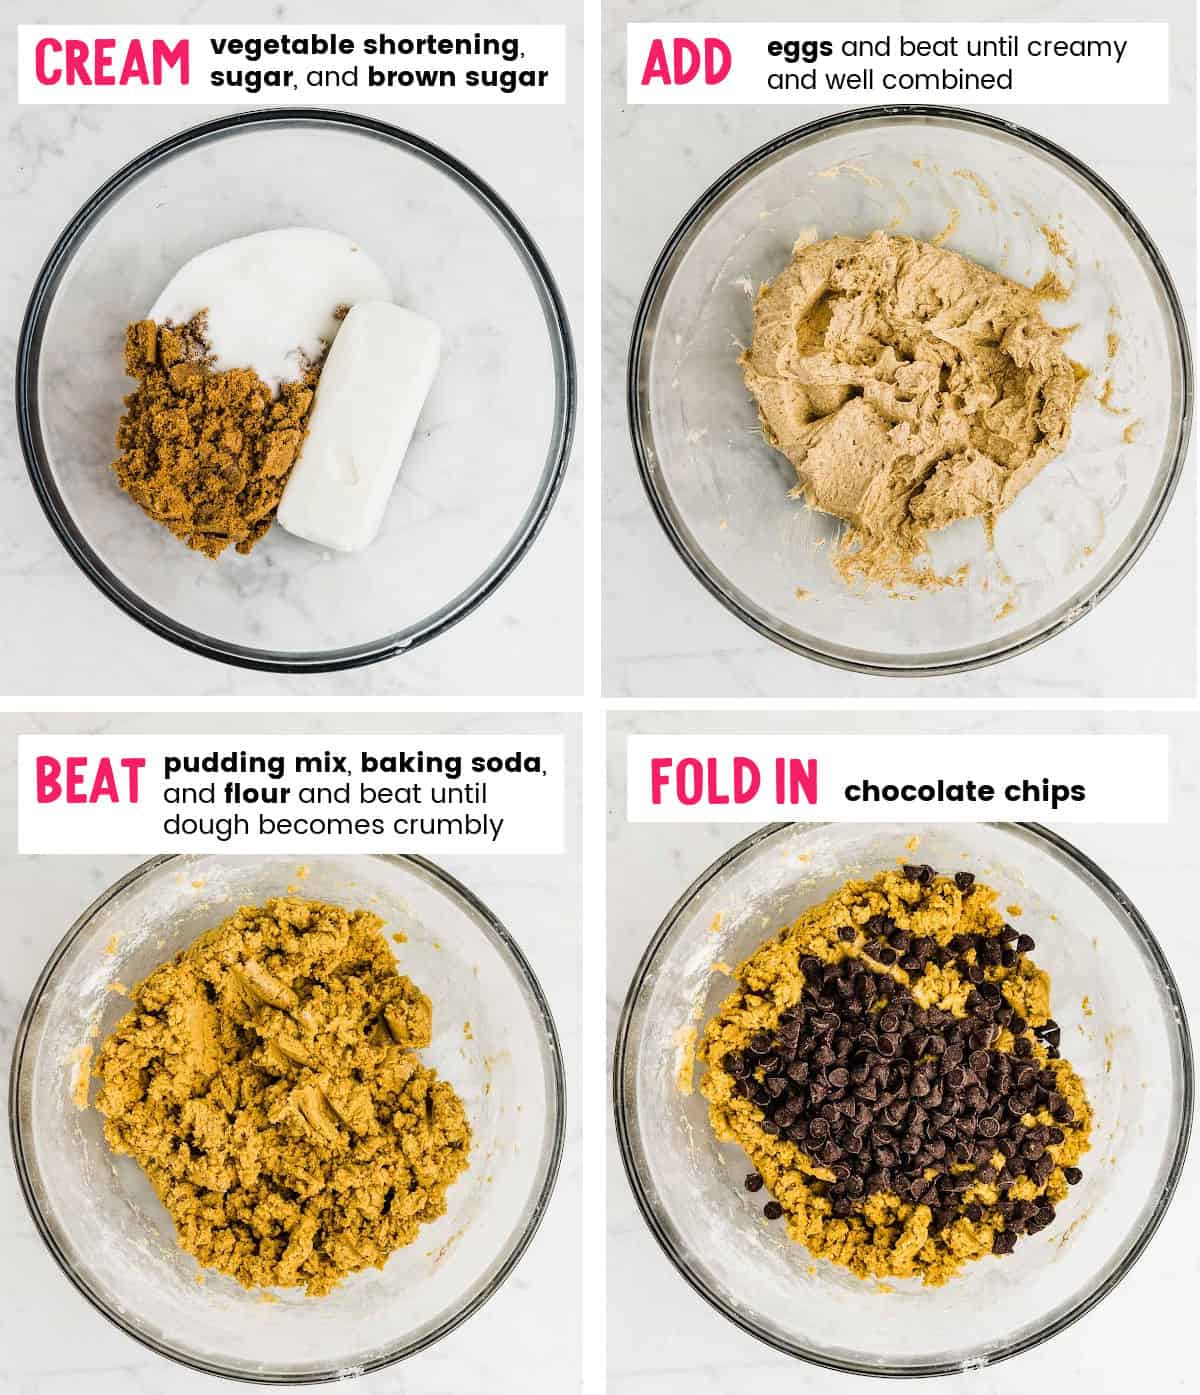 Images showing steps of how to make the cookie dough for the Chocolate Chip Cookies.